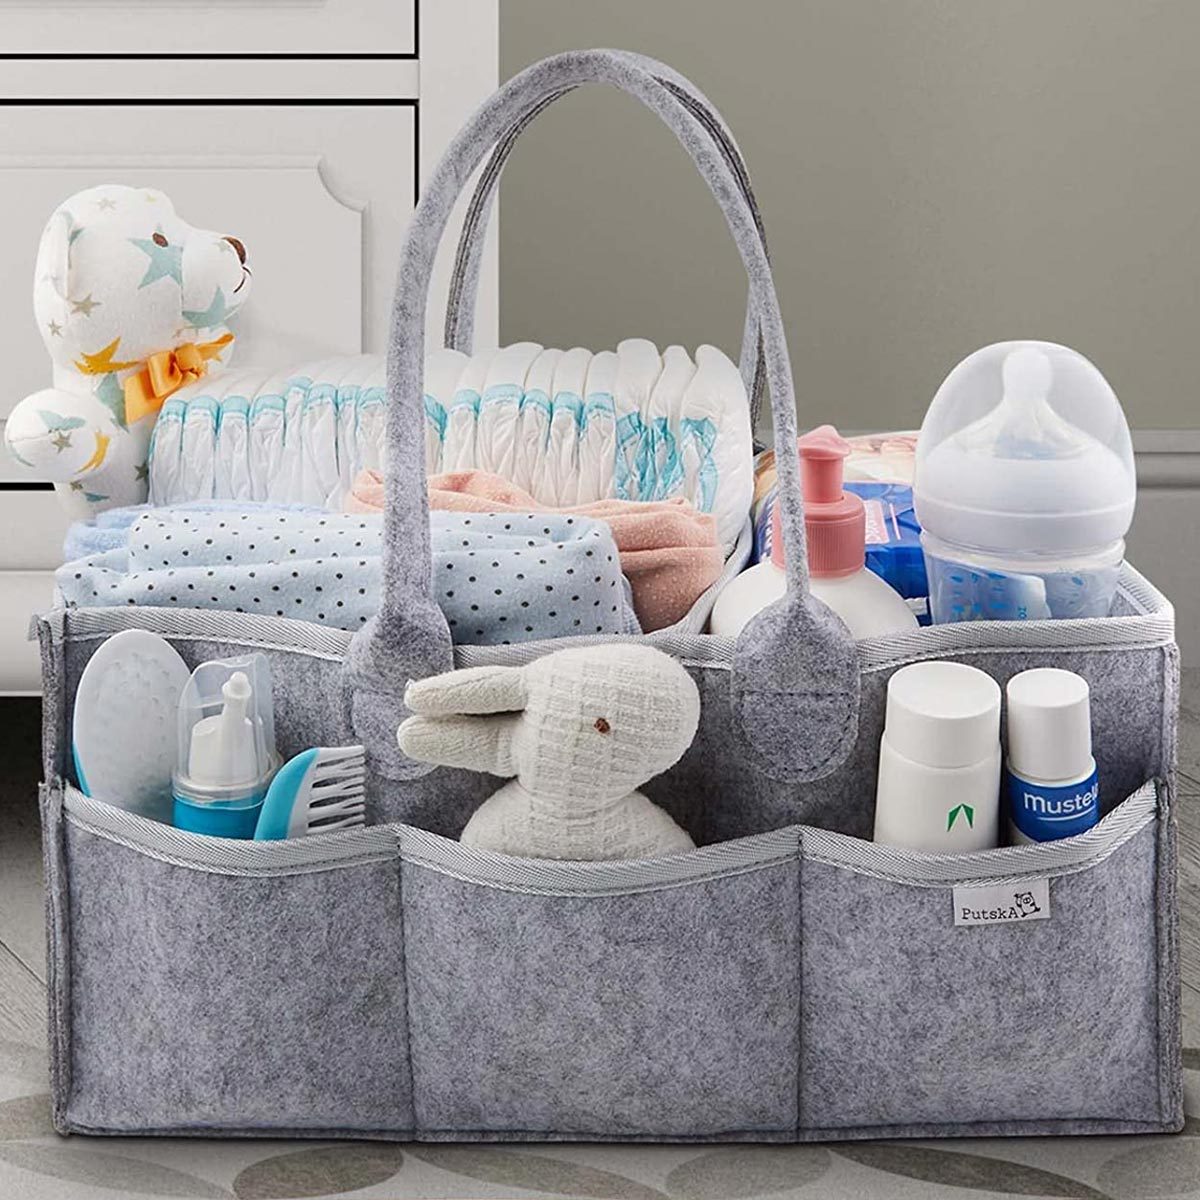 9 Baby Shower Gifts Every Mom-To-Be Will Actually Appreciate